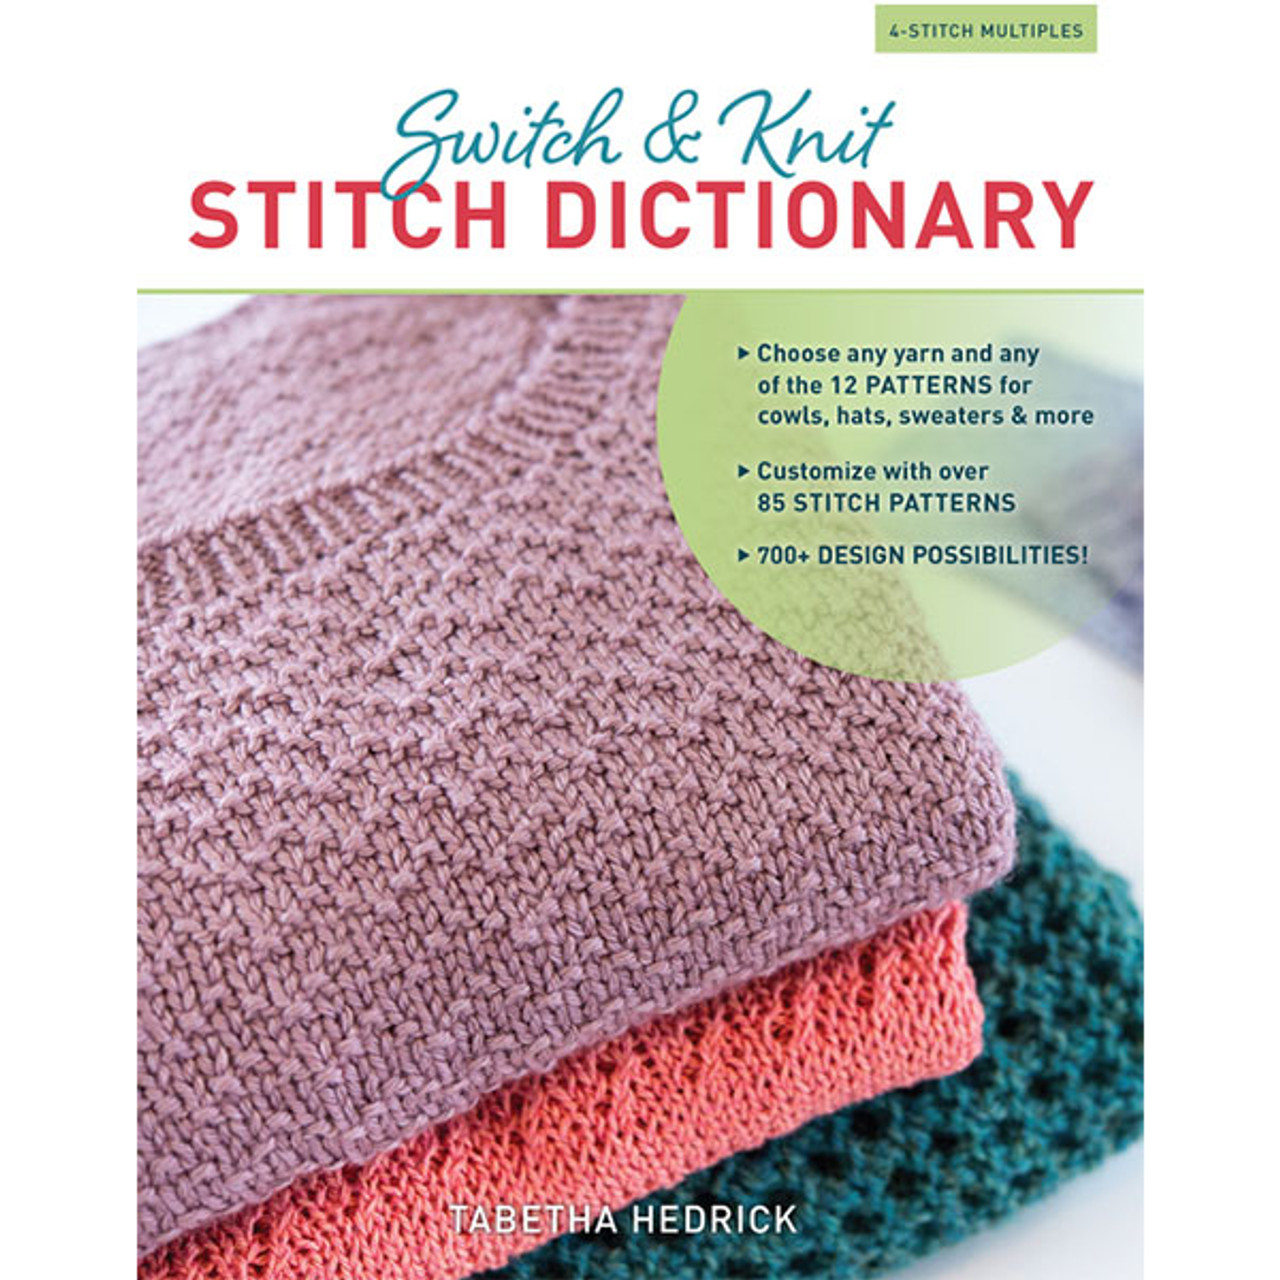 Book Review – 400 Knitting Stitches: A Complete Dictionary of